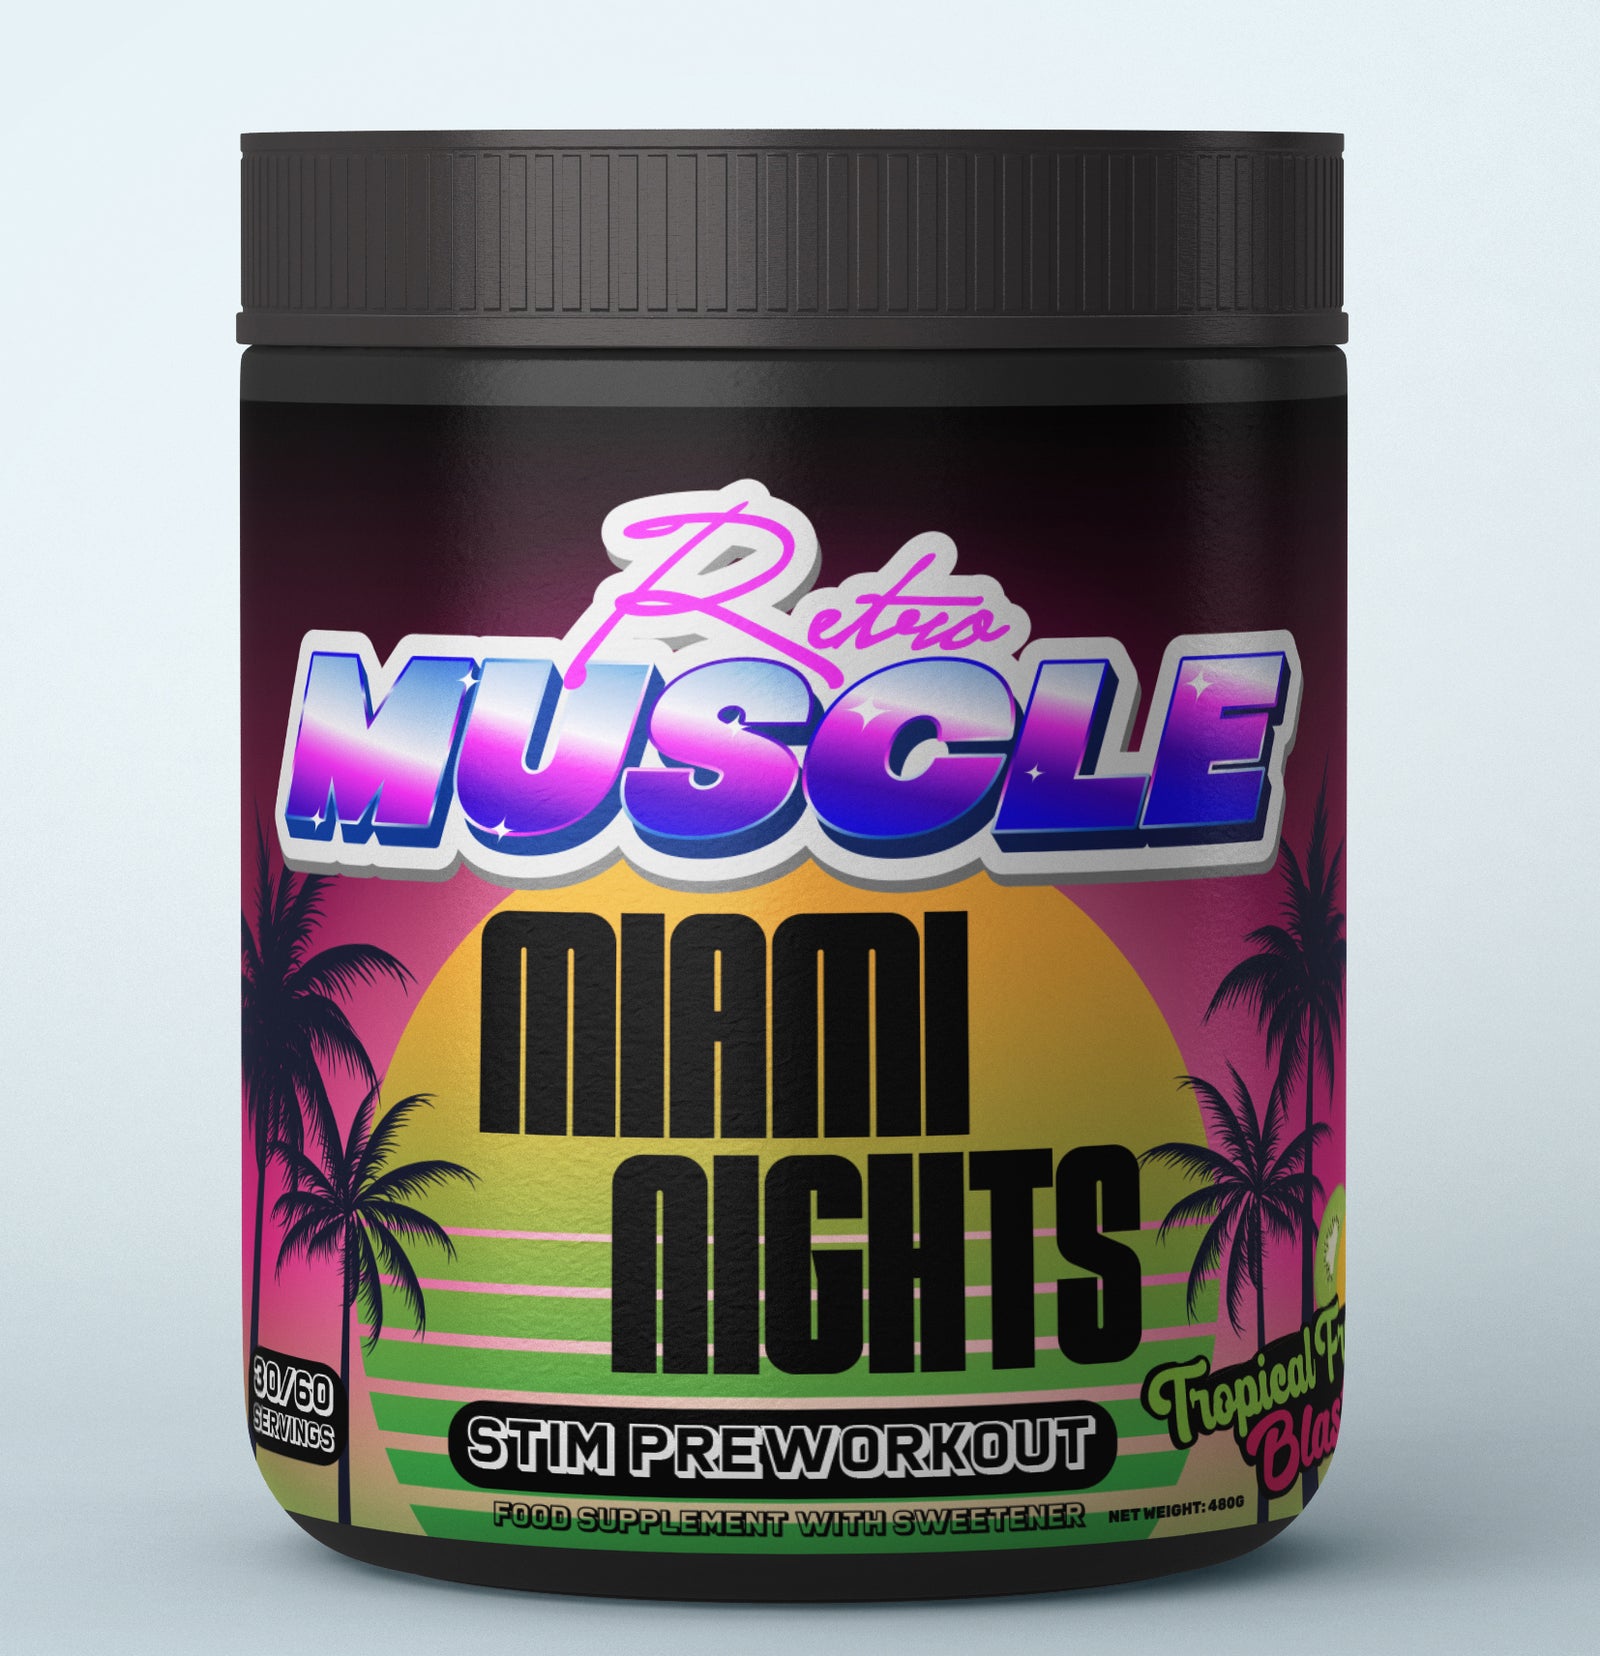 Retro Muscle Miami Nights Pre-Workout 480g